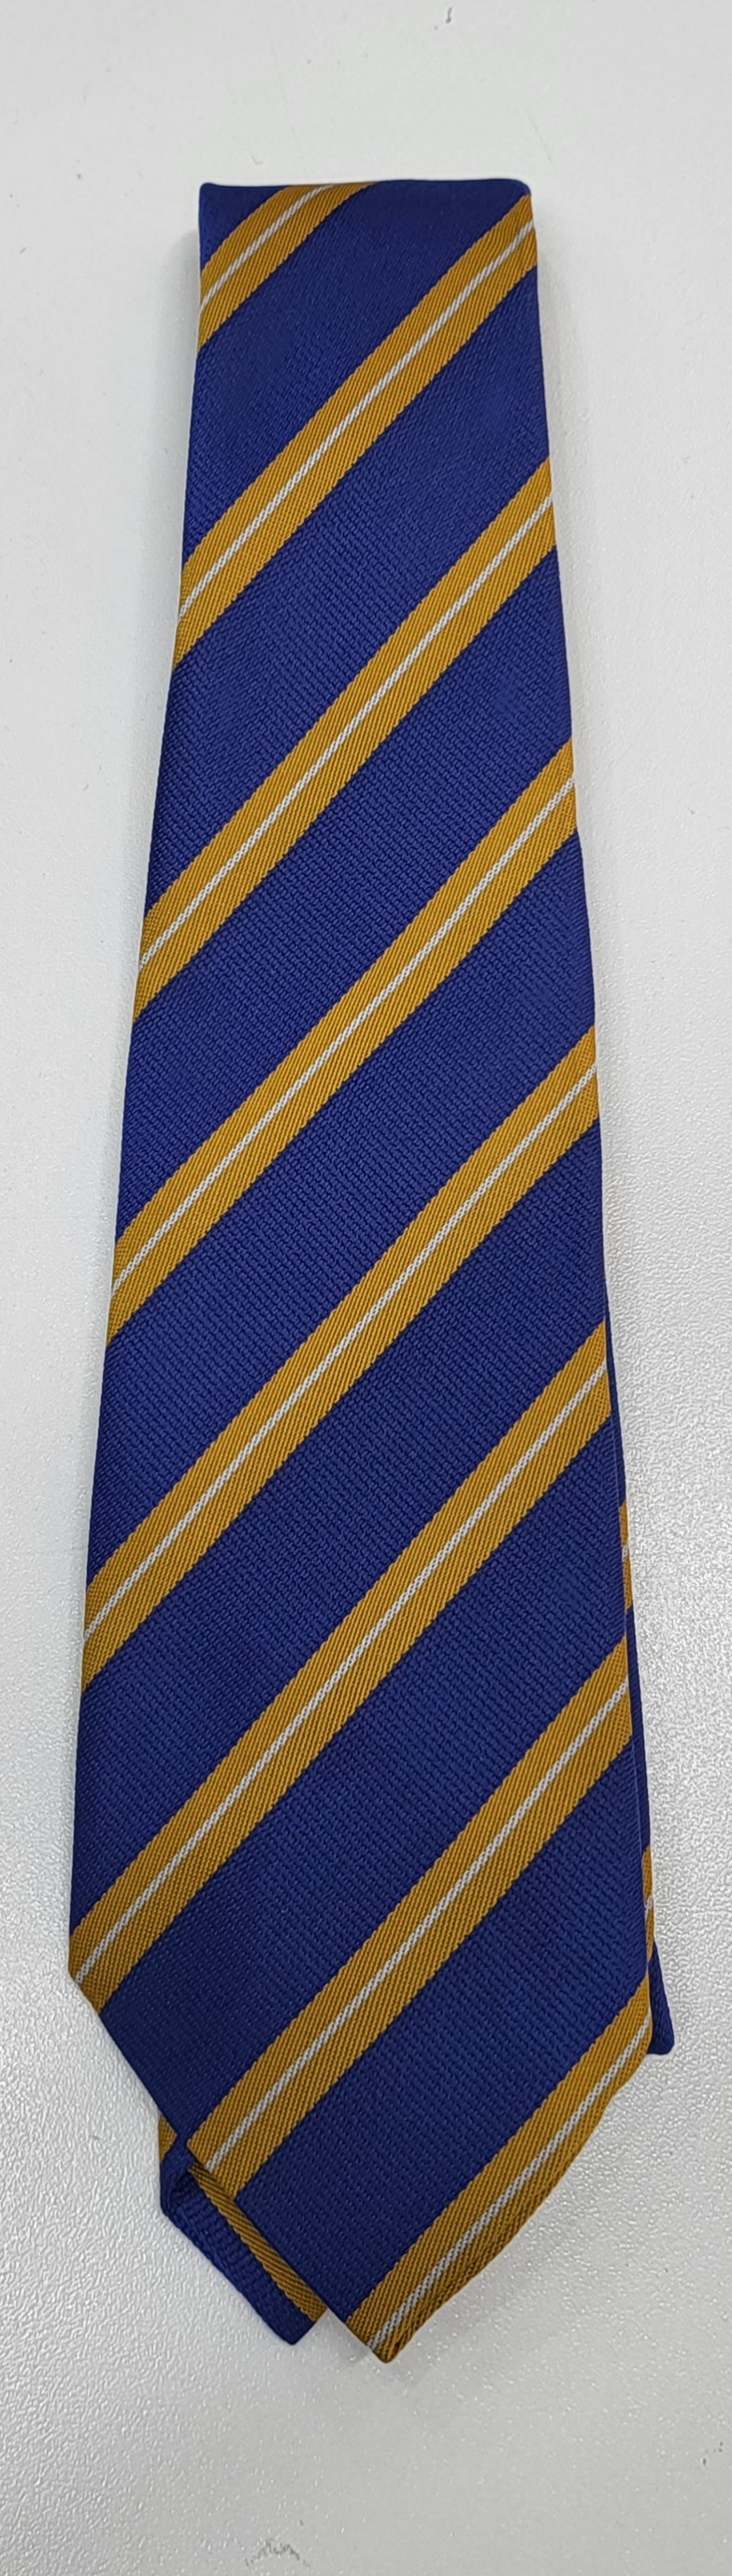 Our Lady of Annunciation Primary Standard Tie